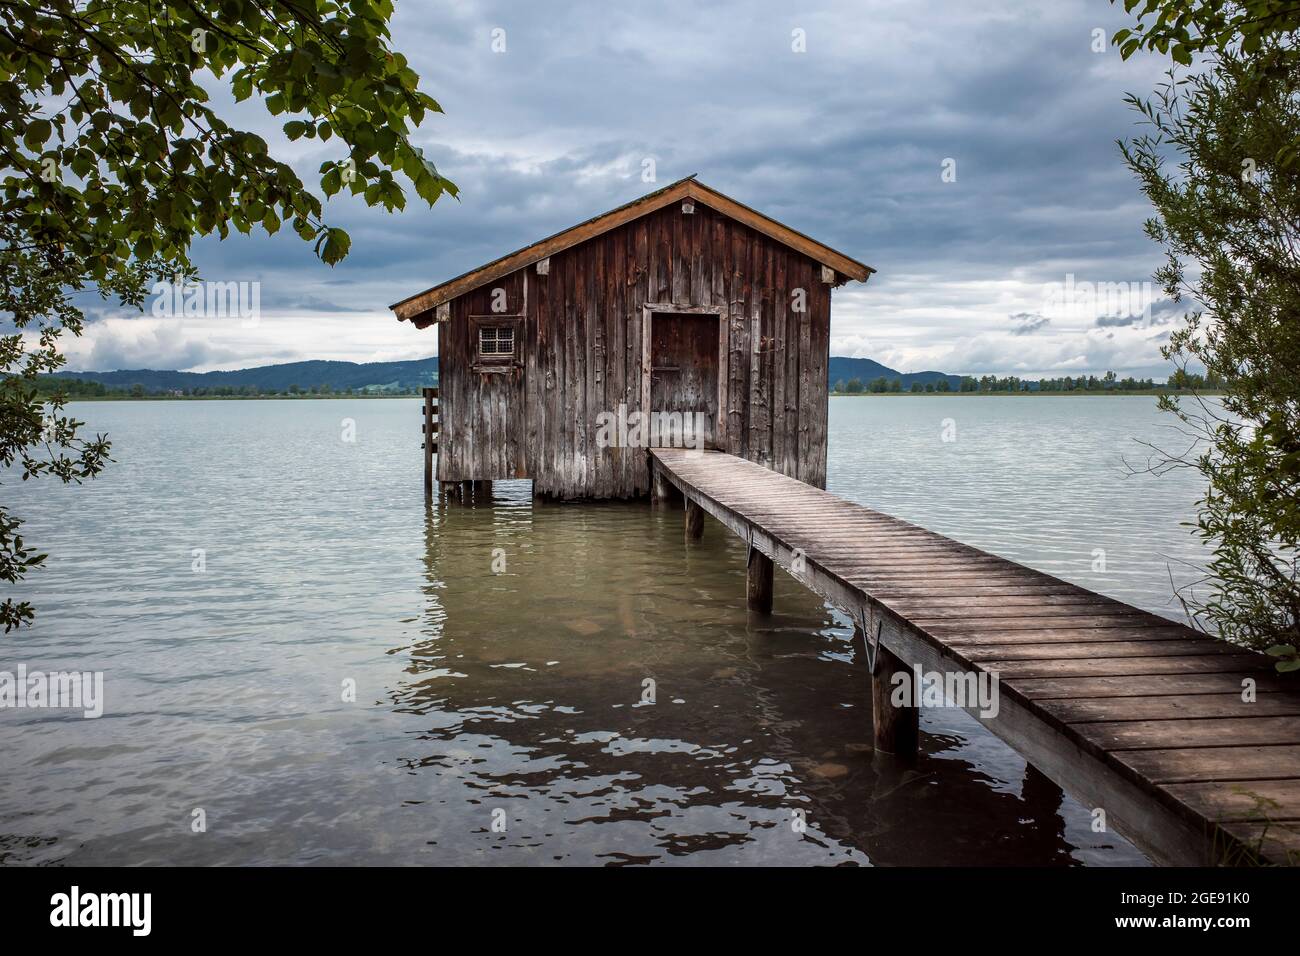 bathhouse at the lake cloudy day Stock Photo